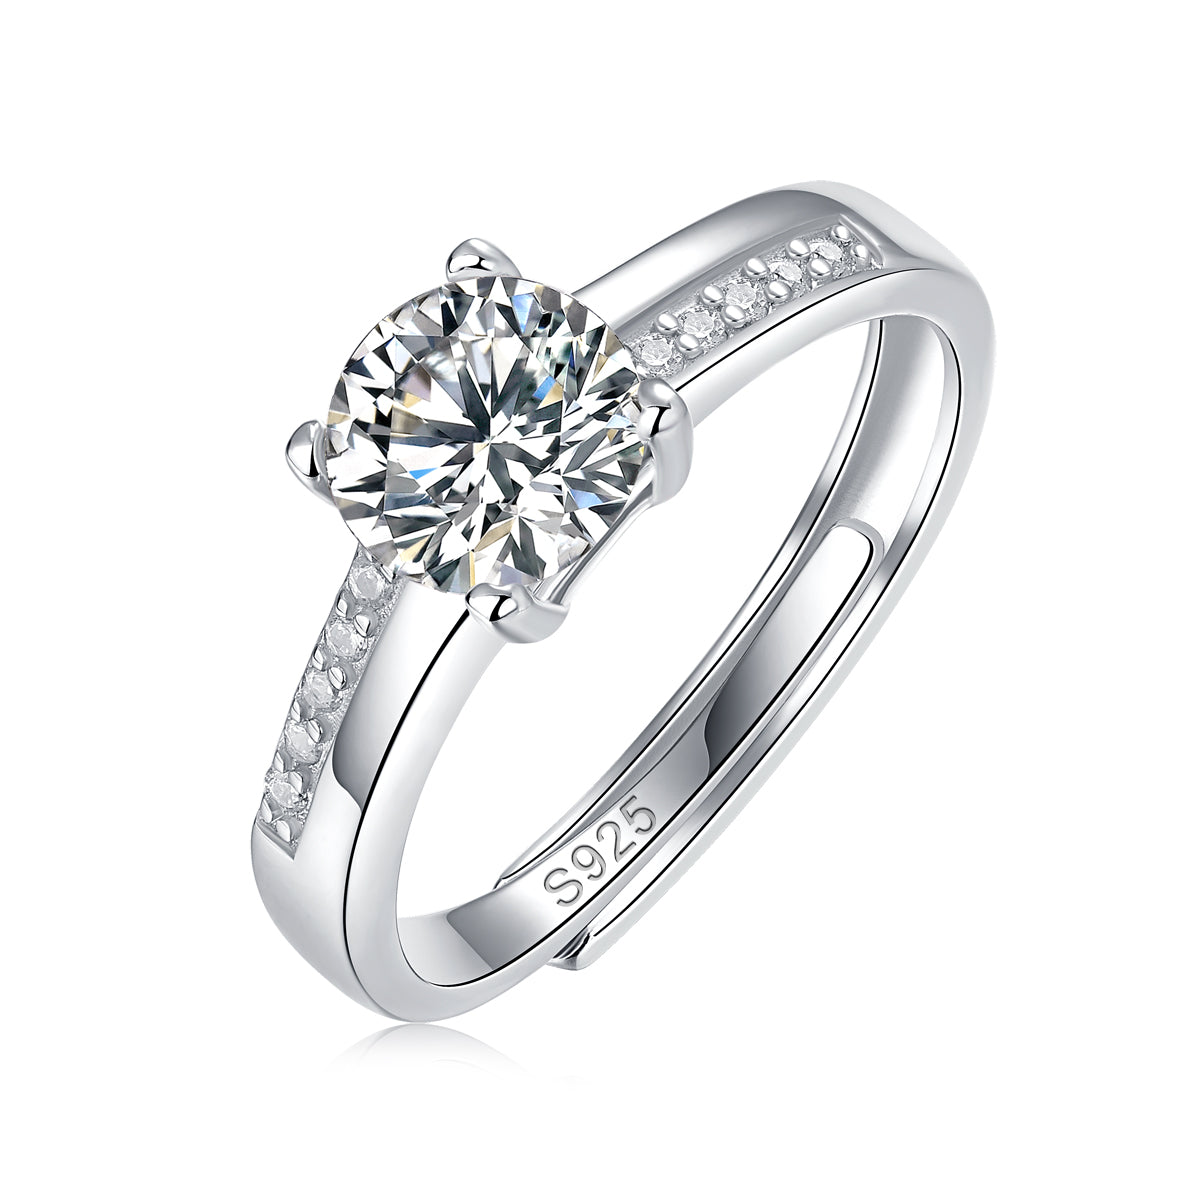 Moissanite lab-grown Diamond Engagement Ring for women - 18K White Gold Plated S925 Sterling Silver - Well of Wishes - 1